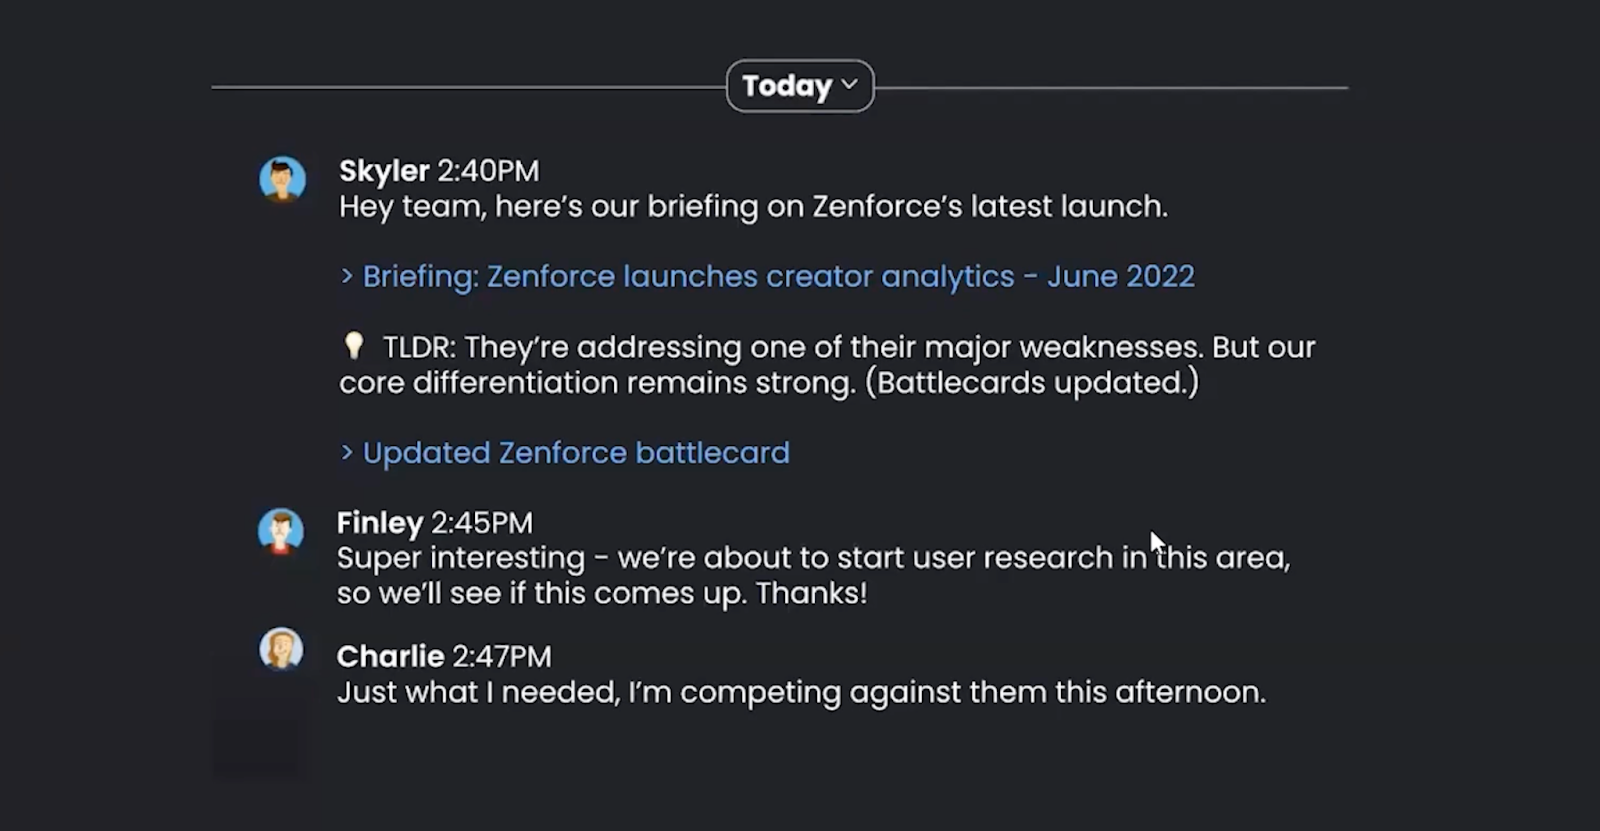 Another pretend Slack conversation between the same 3 people, but a redo of the first image had they had the information on how to create a supportive competitive news briefing. Skyler says "Hey team, here's our briefing on Zenforce's latest launch. TLDR: They're addressing one of their major weaknesses. But our core differentiation remains strong. (Battlecards updated.)" Then Finley says "Super interesting - we're about to start user research in this area, so we'll see if this comes up. Thanks!" and Charlie says "Just what I needed, I'm competing against them this afternoon."